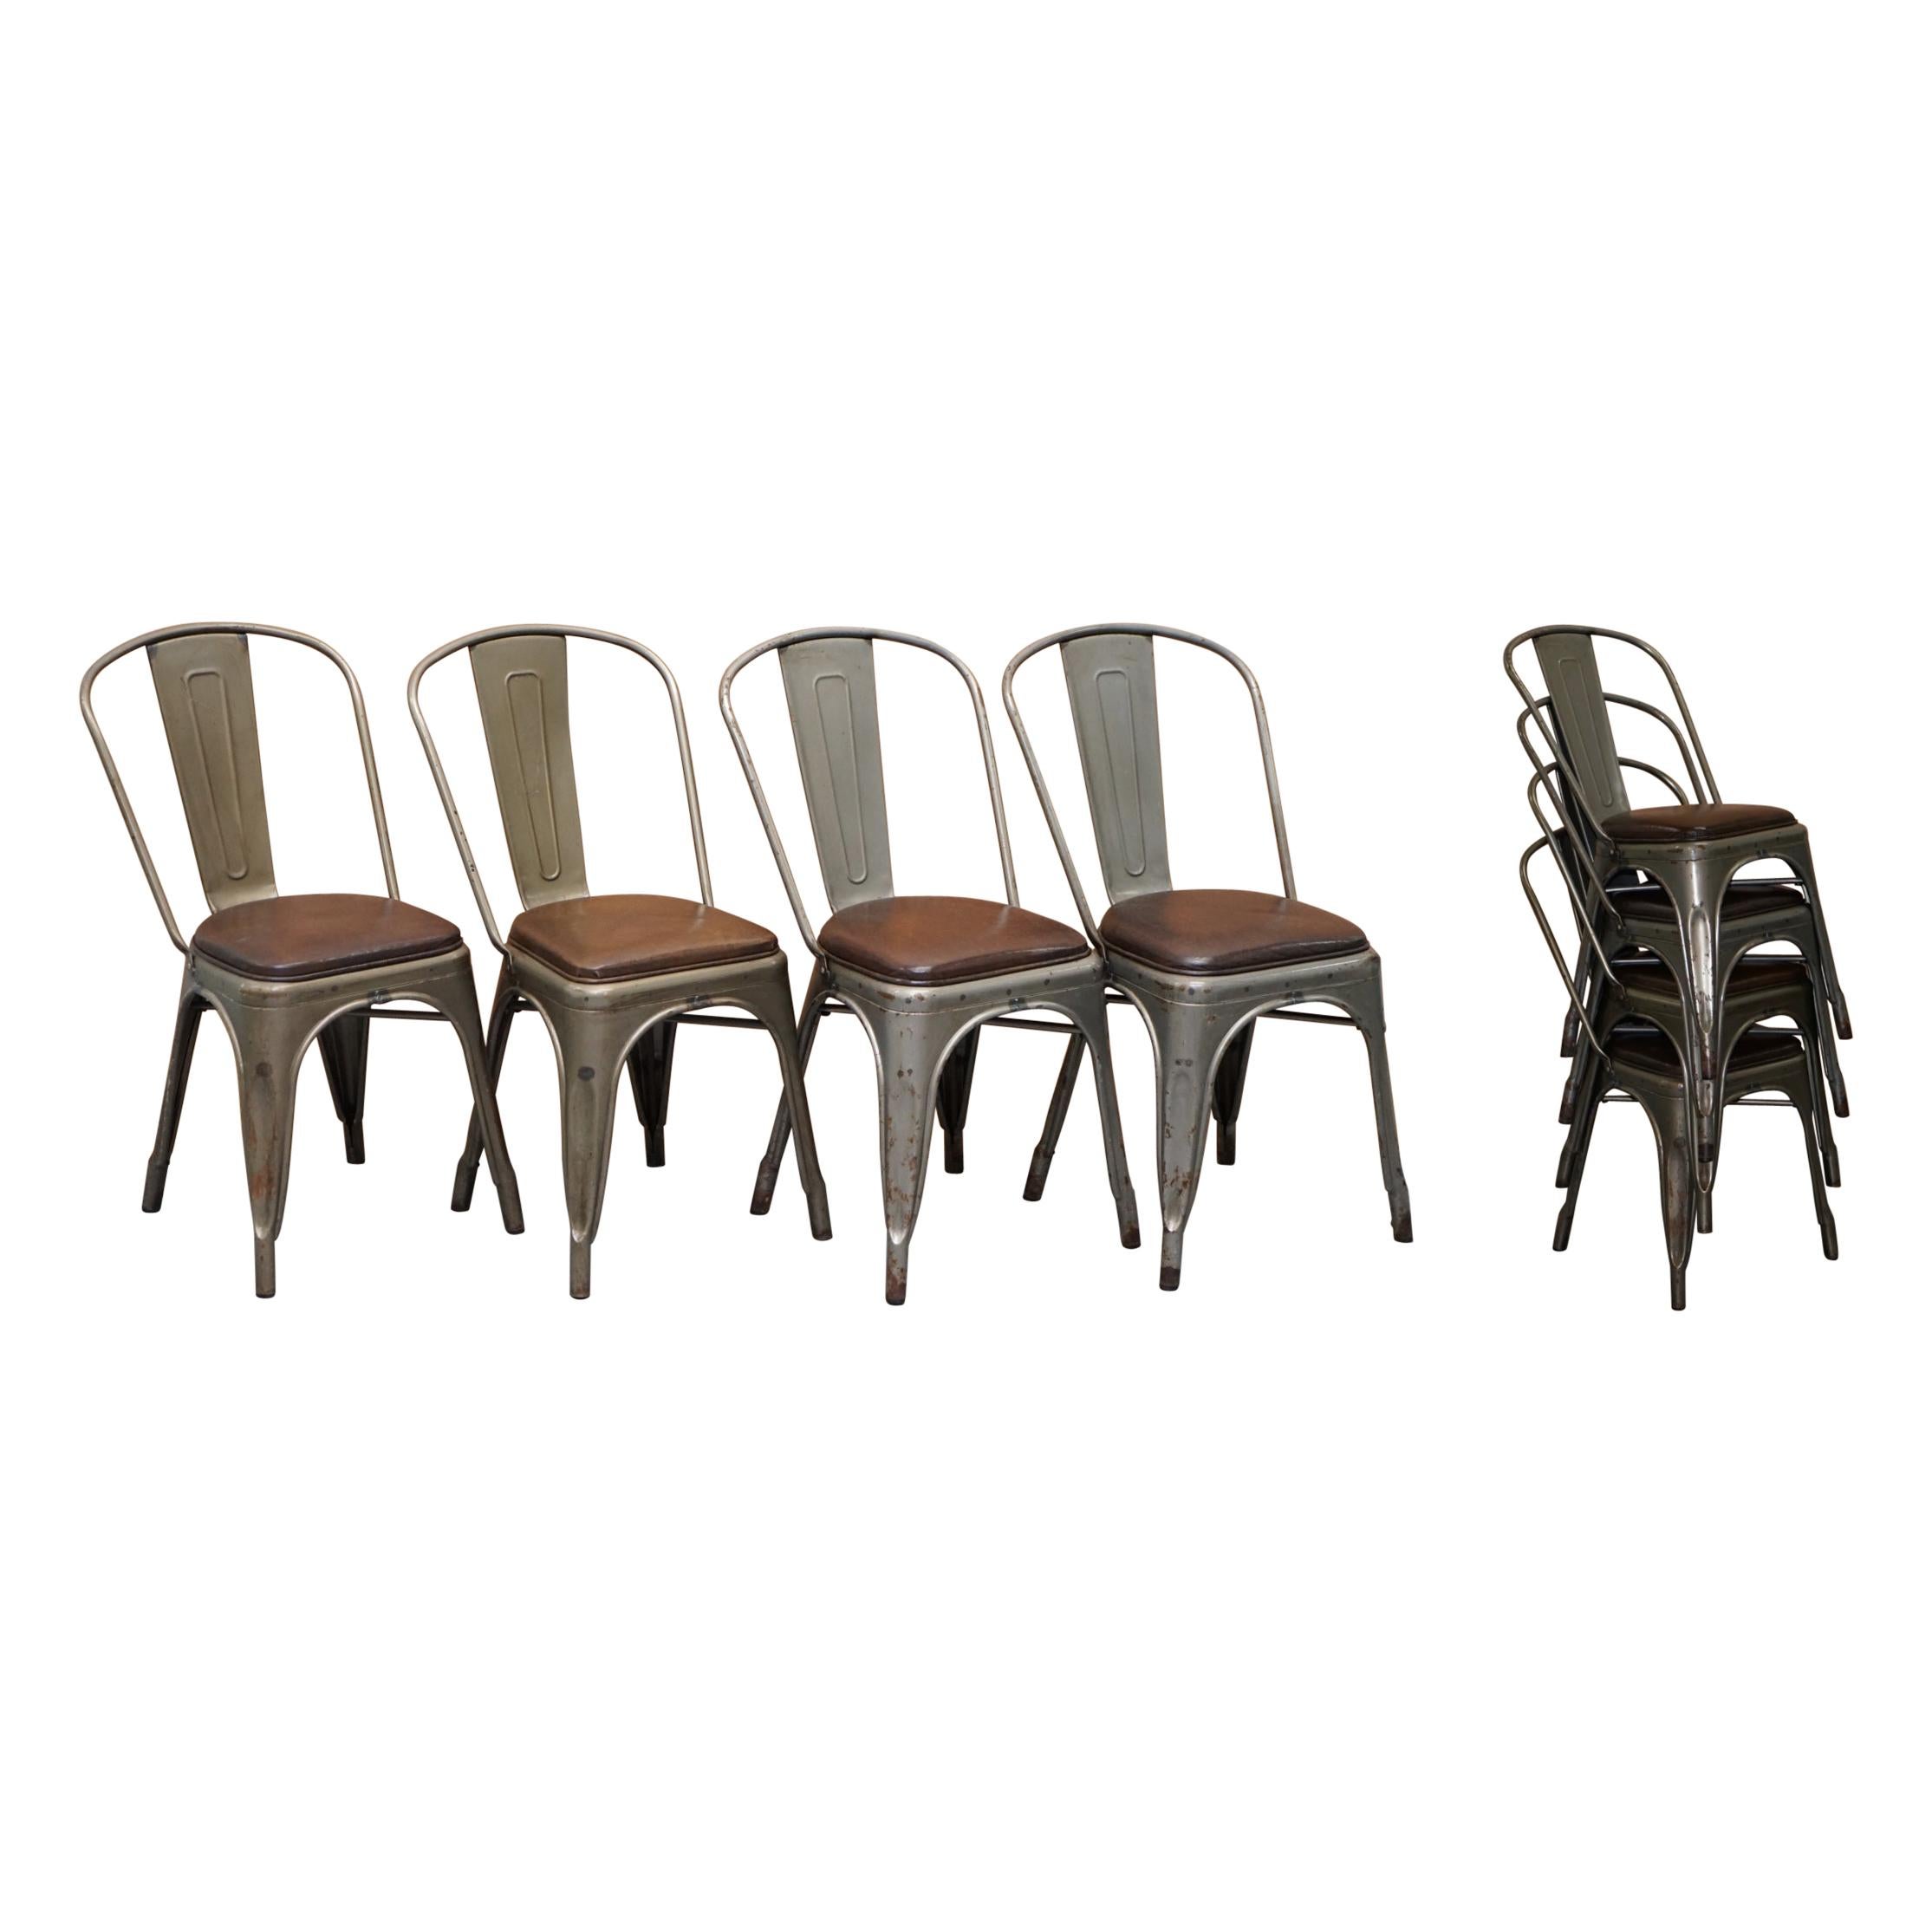 Set of Four Gun Metal Grey Stacking Chairs Tolix V2 with Upholstered Seat Pad